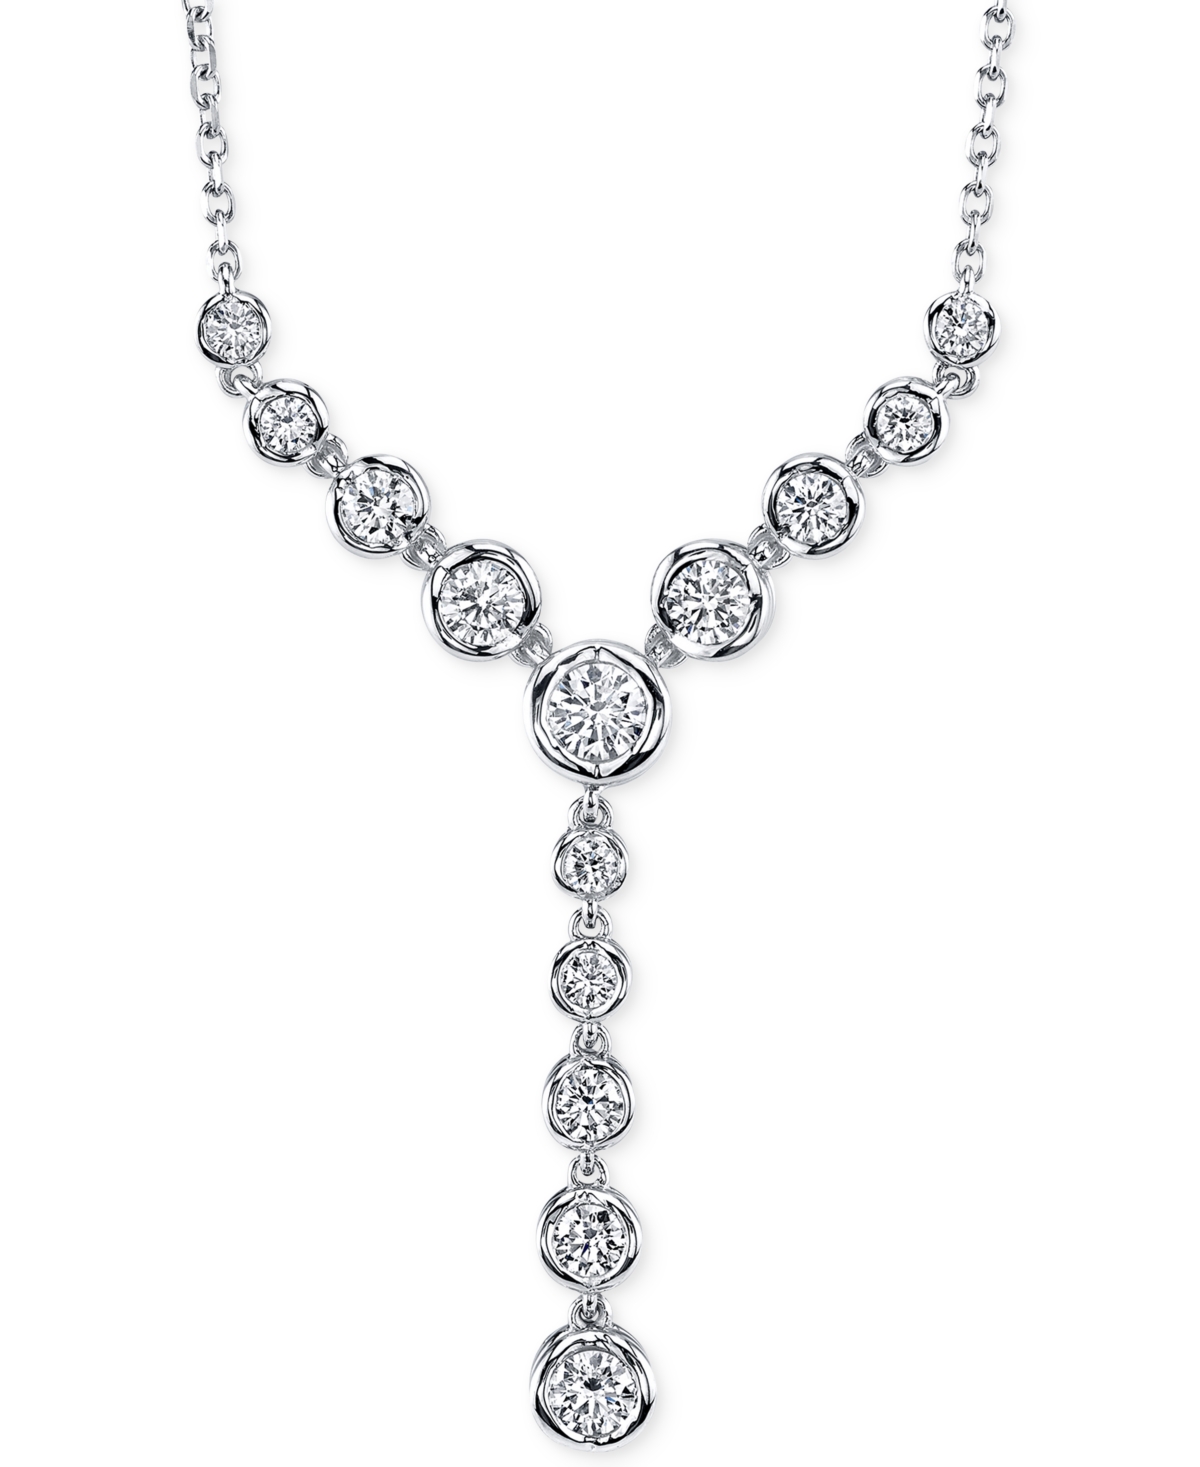 Diamond Lariat Necklace (1 ct. t.w) in 14k Gold or White Gold - Yellow Gold